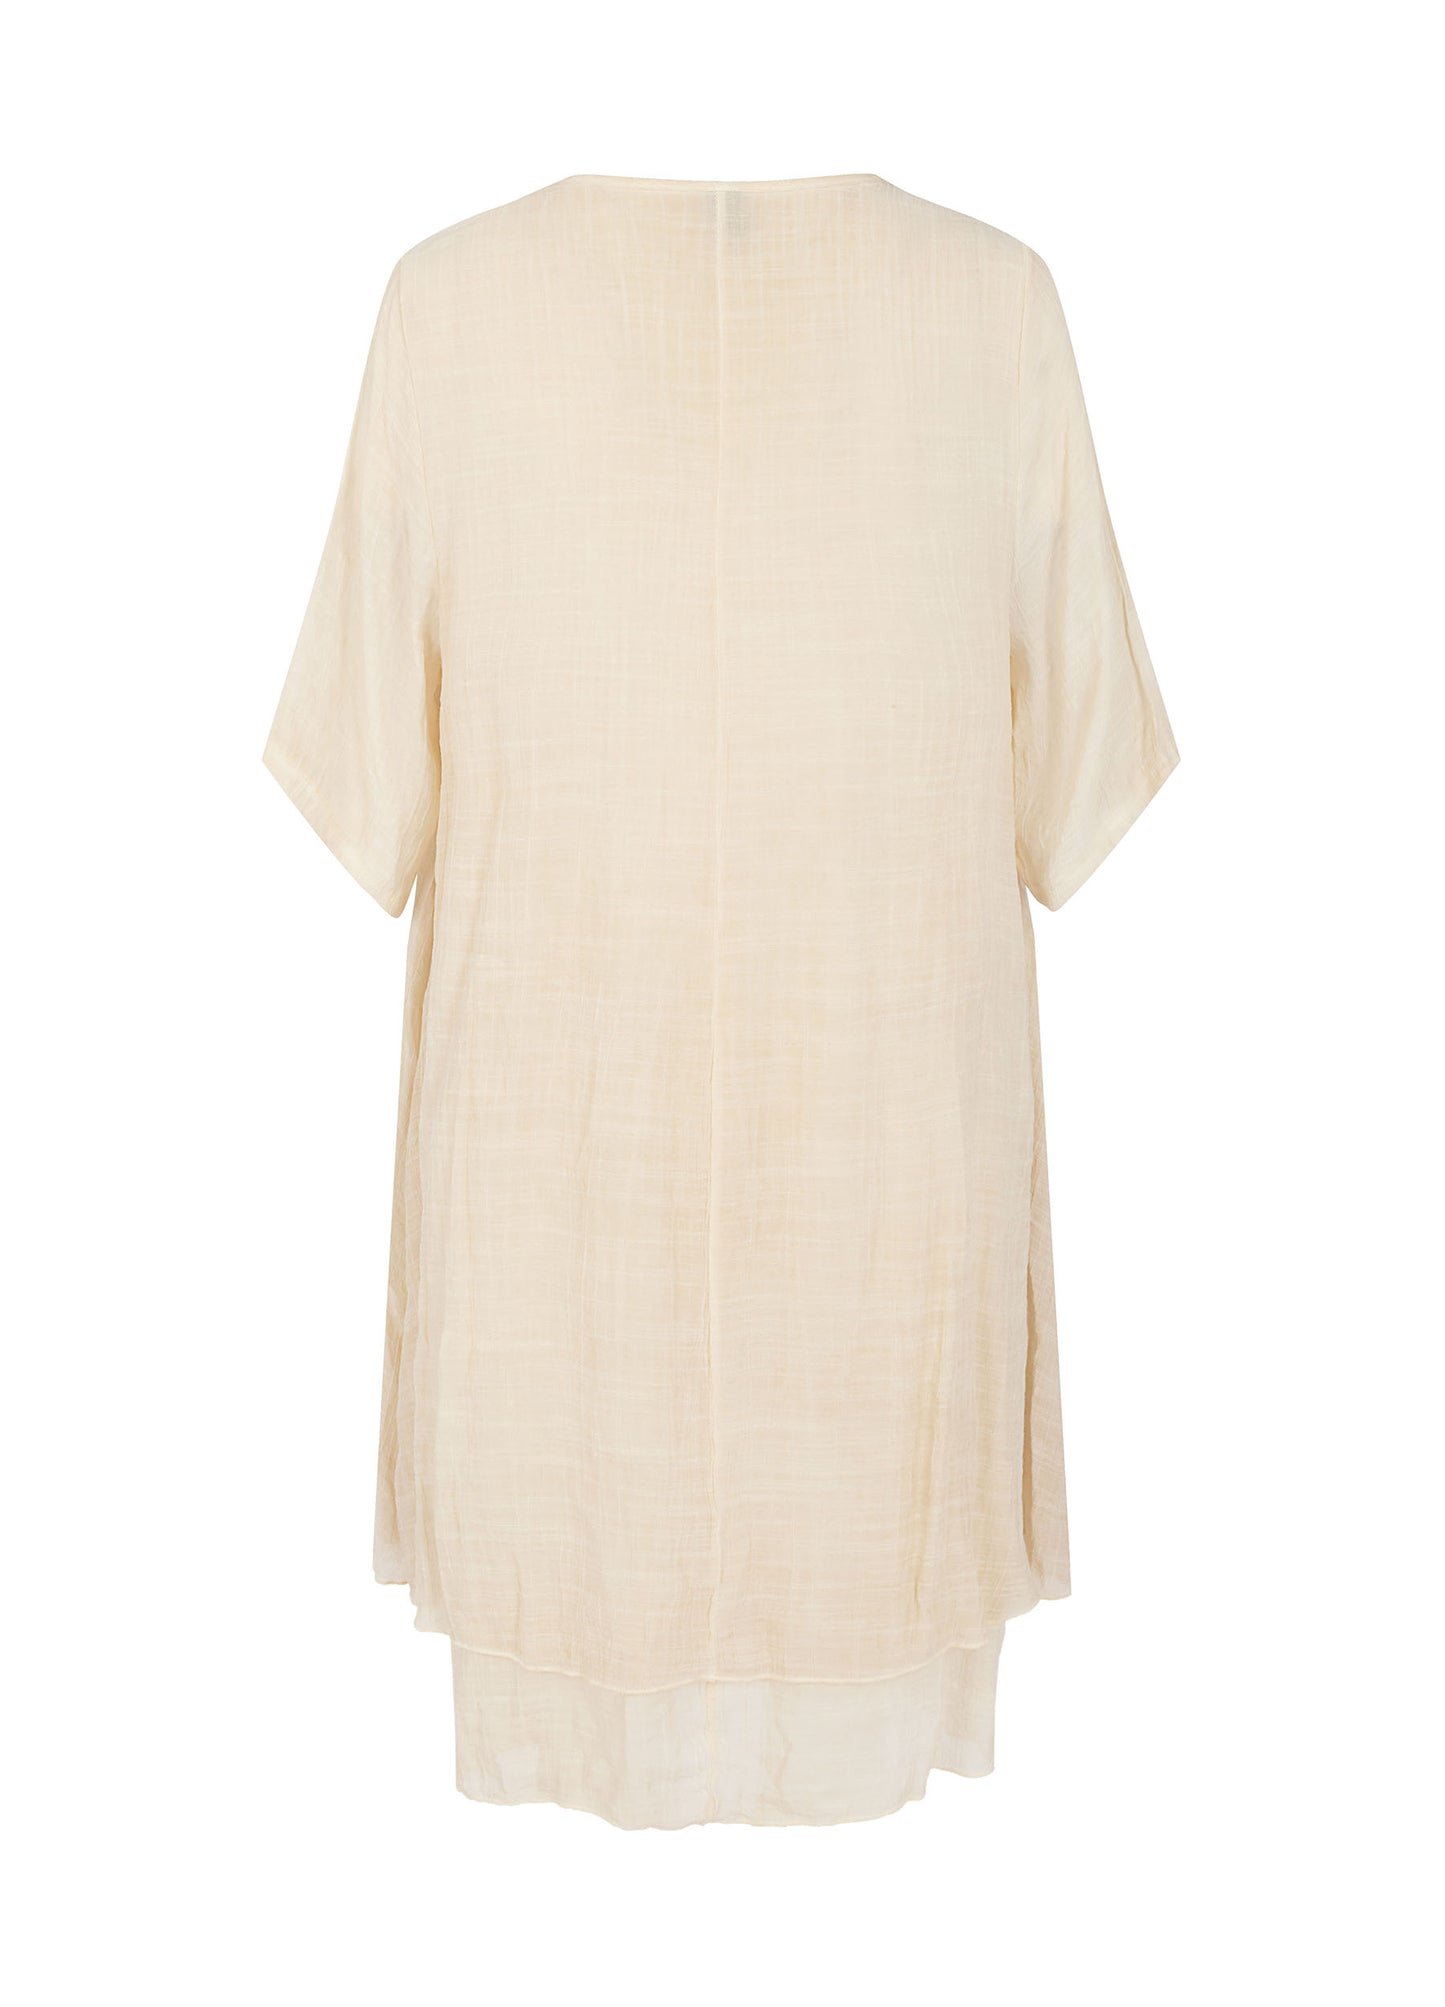 MECALA Women's Beige Cardigan Dress with Wooden Feather Necklace